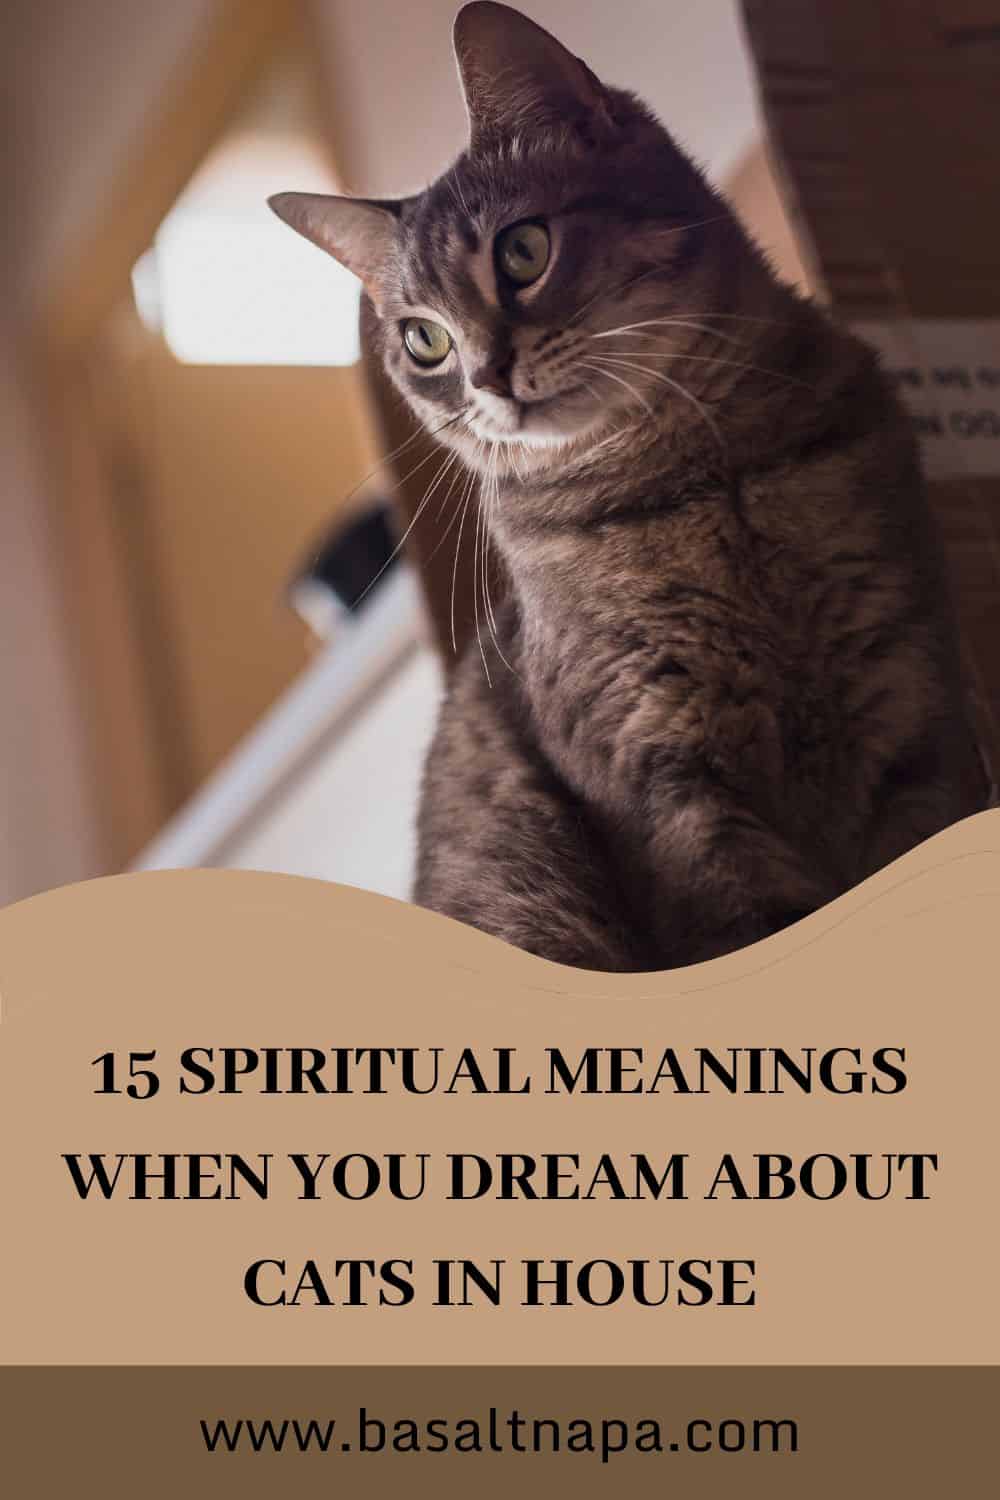 15 Spiritual Meanings When You Dream About Cats in House